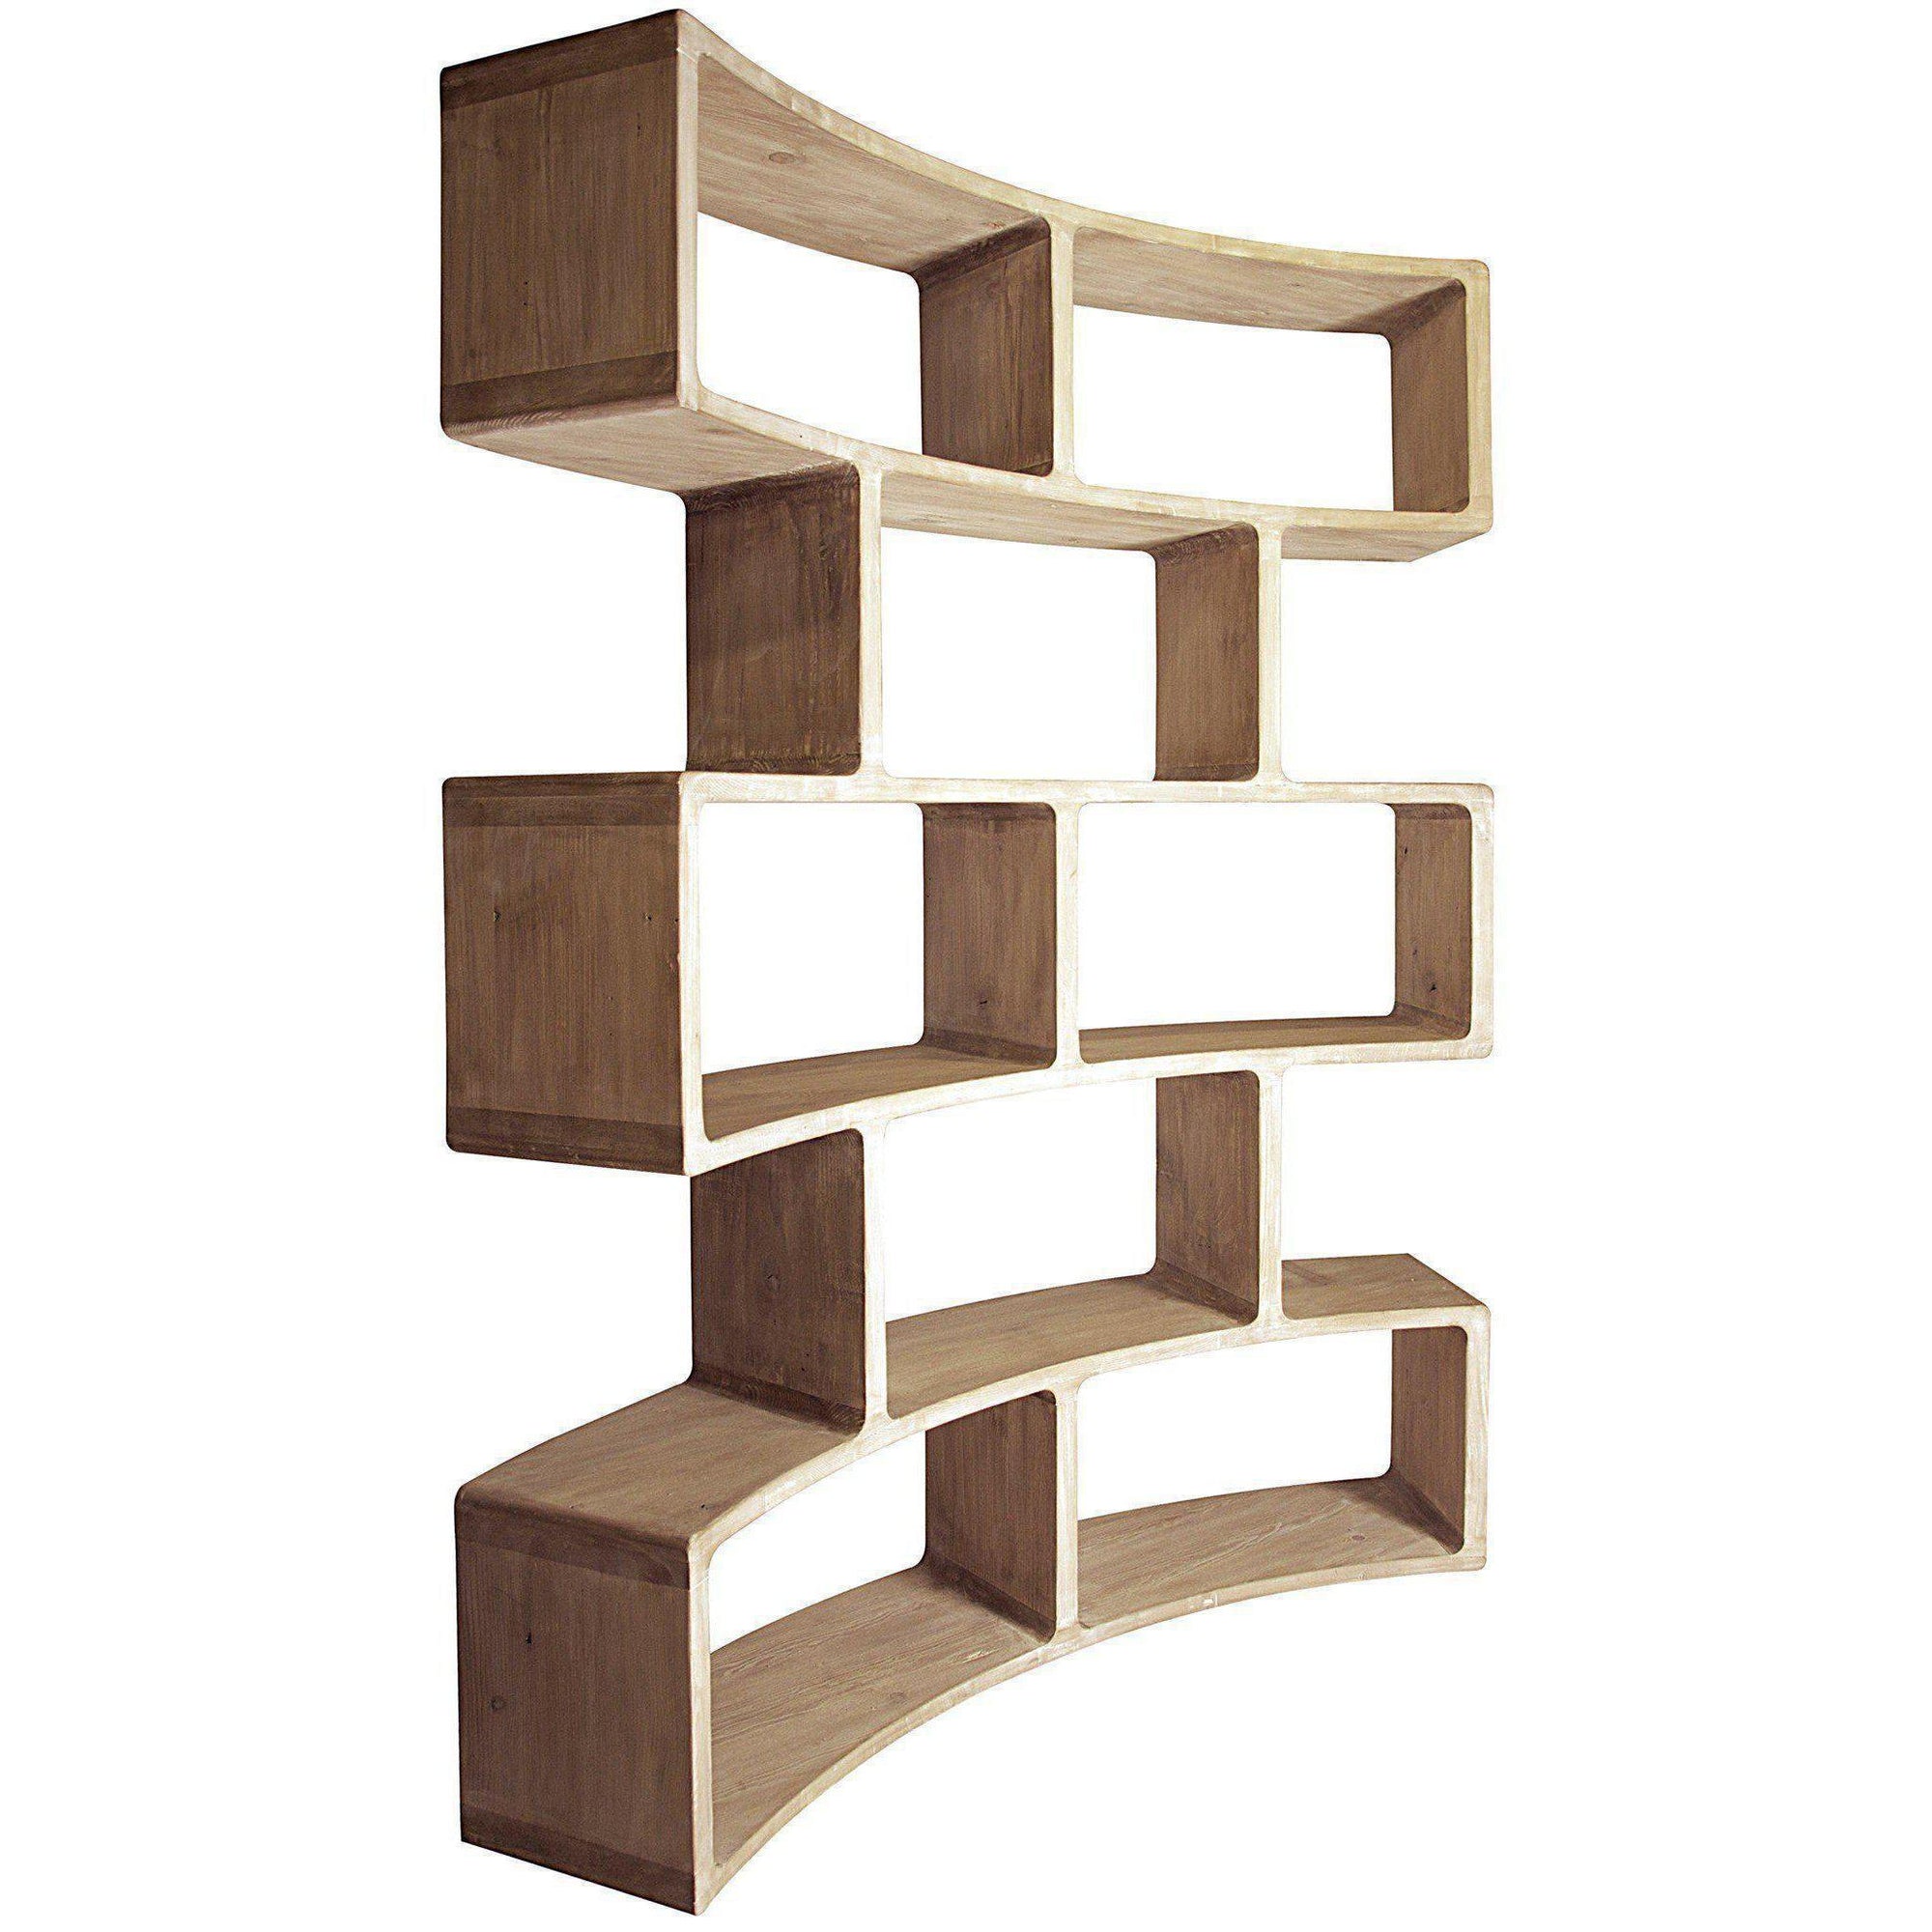 Shop Cfc Bookcases at Blue Hand Home